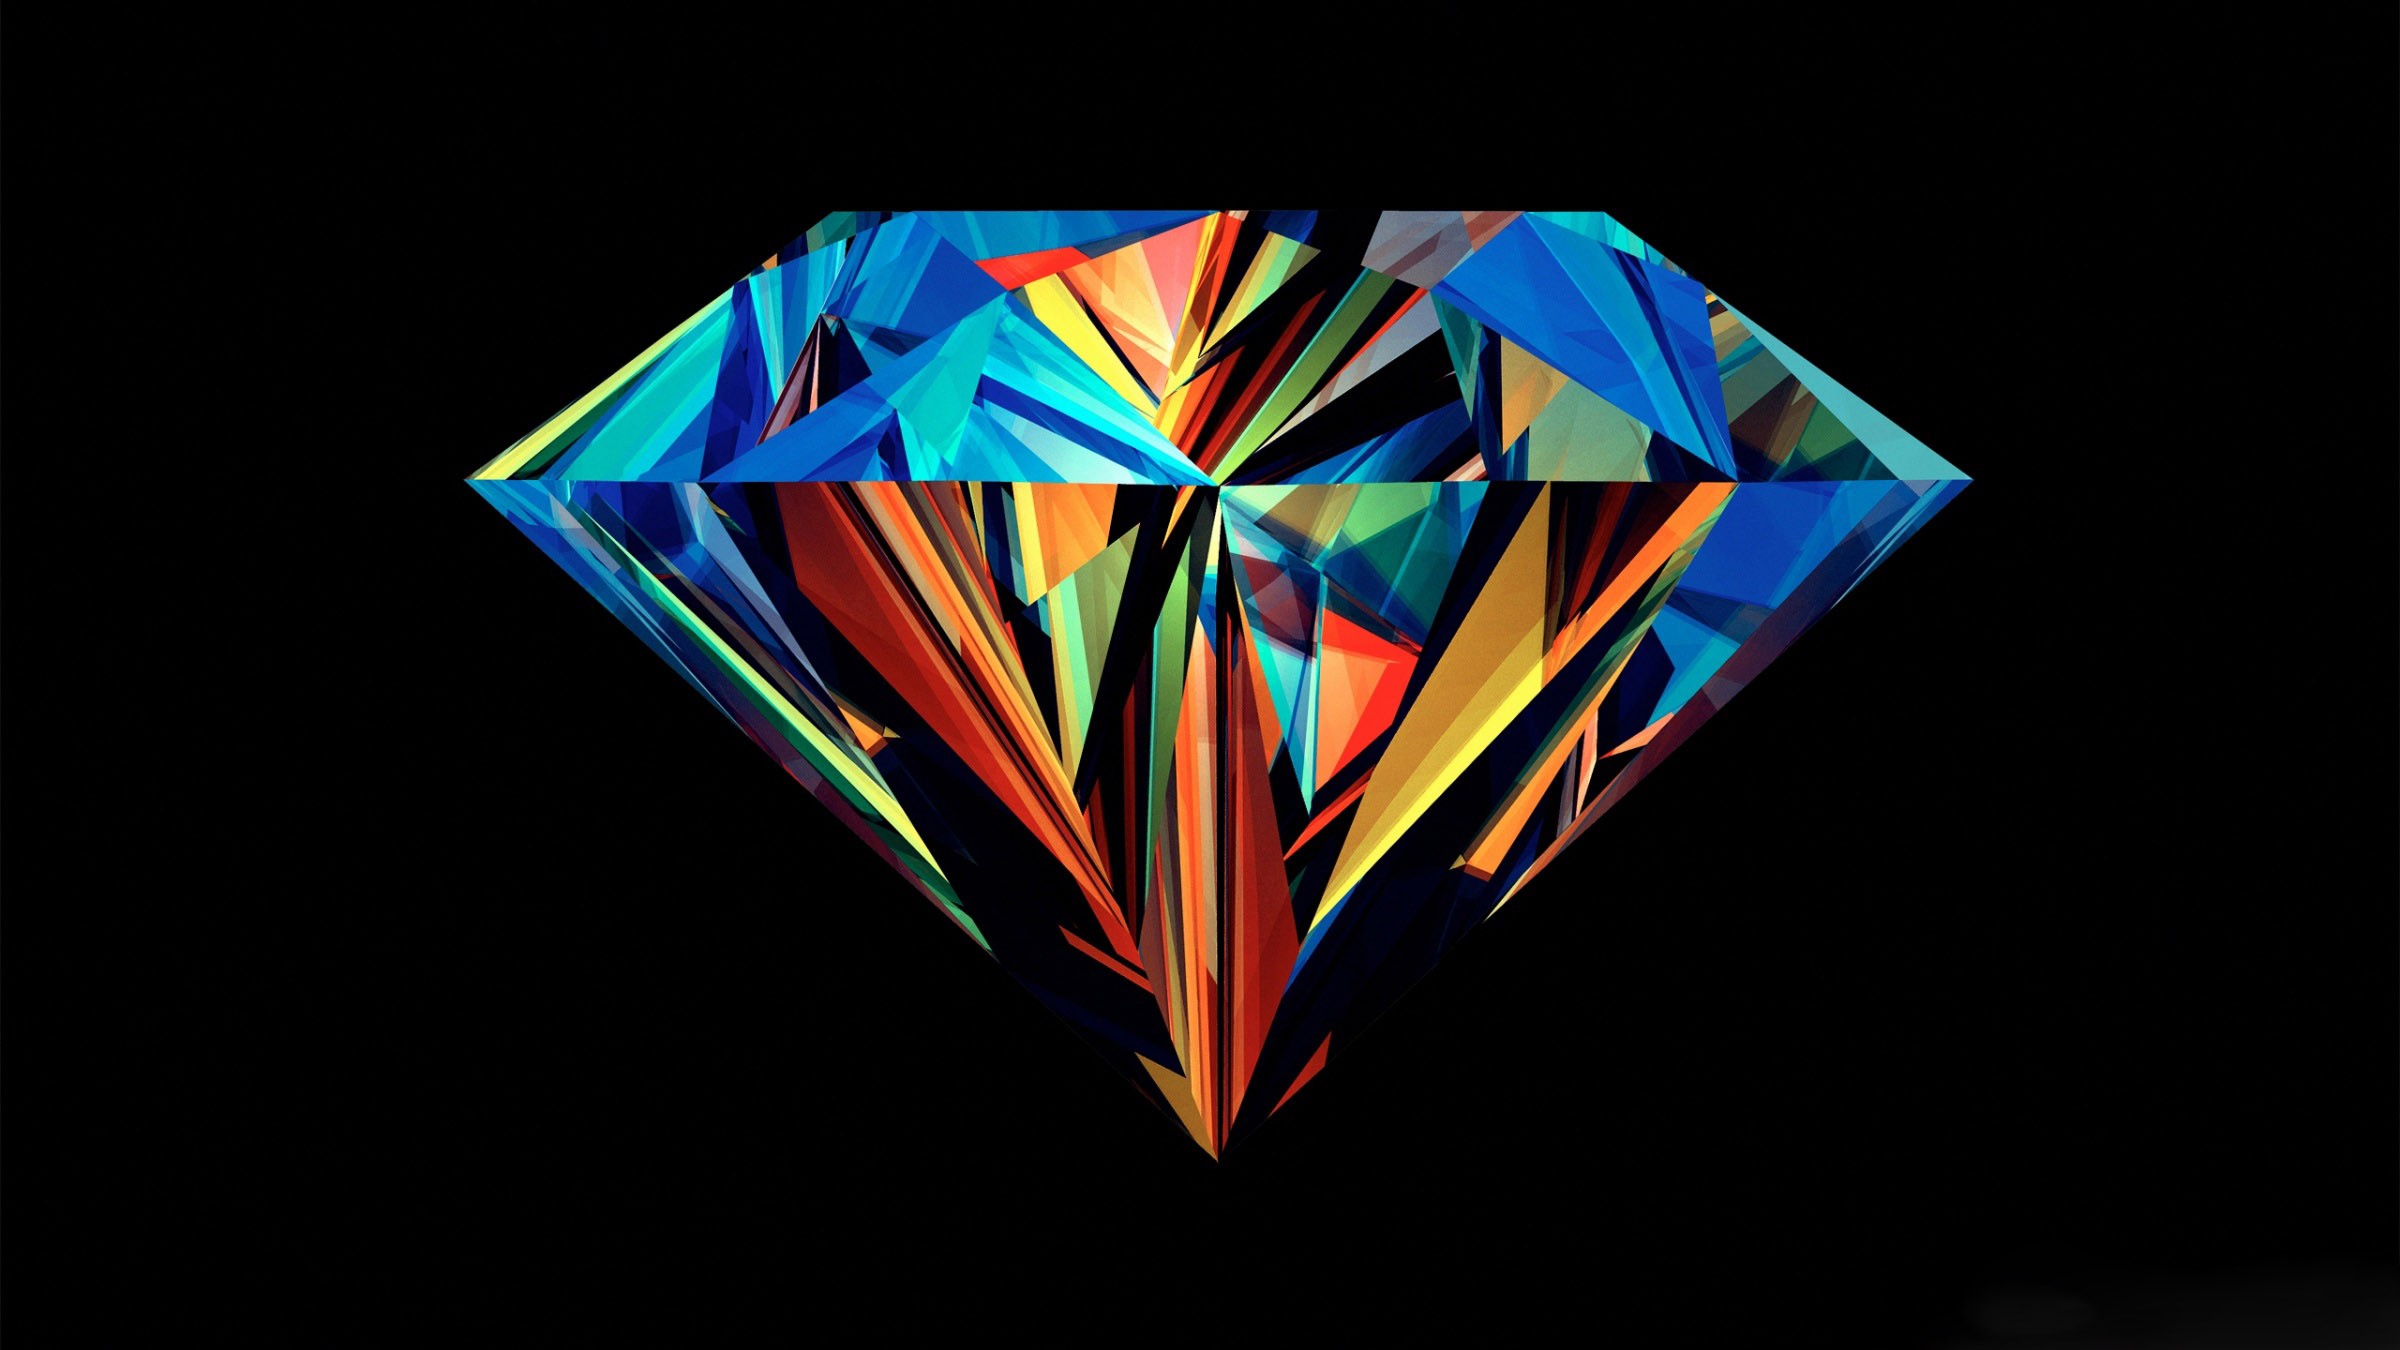 General 2400x1350 Justin Maller diamonds facets black background digital art colorful abstract simple background 3D Abstract CGI